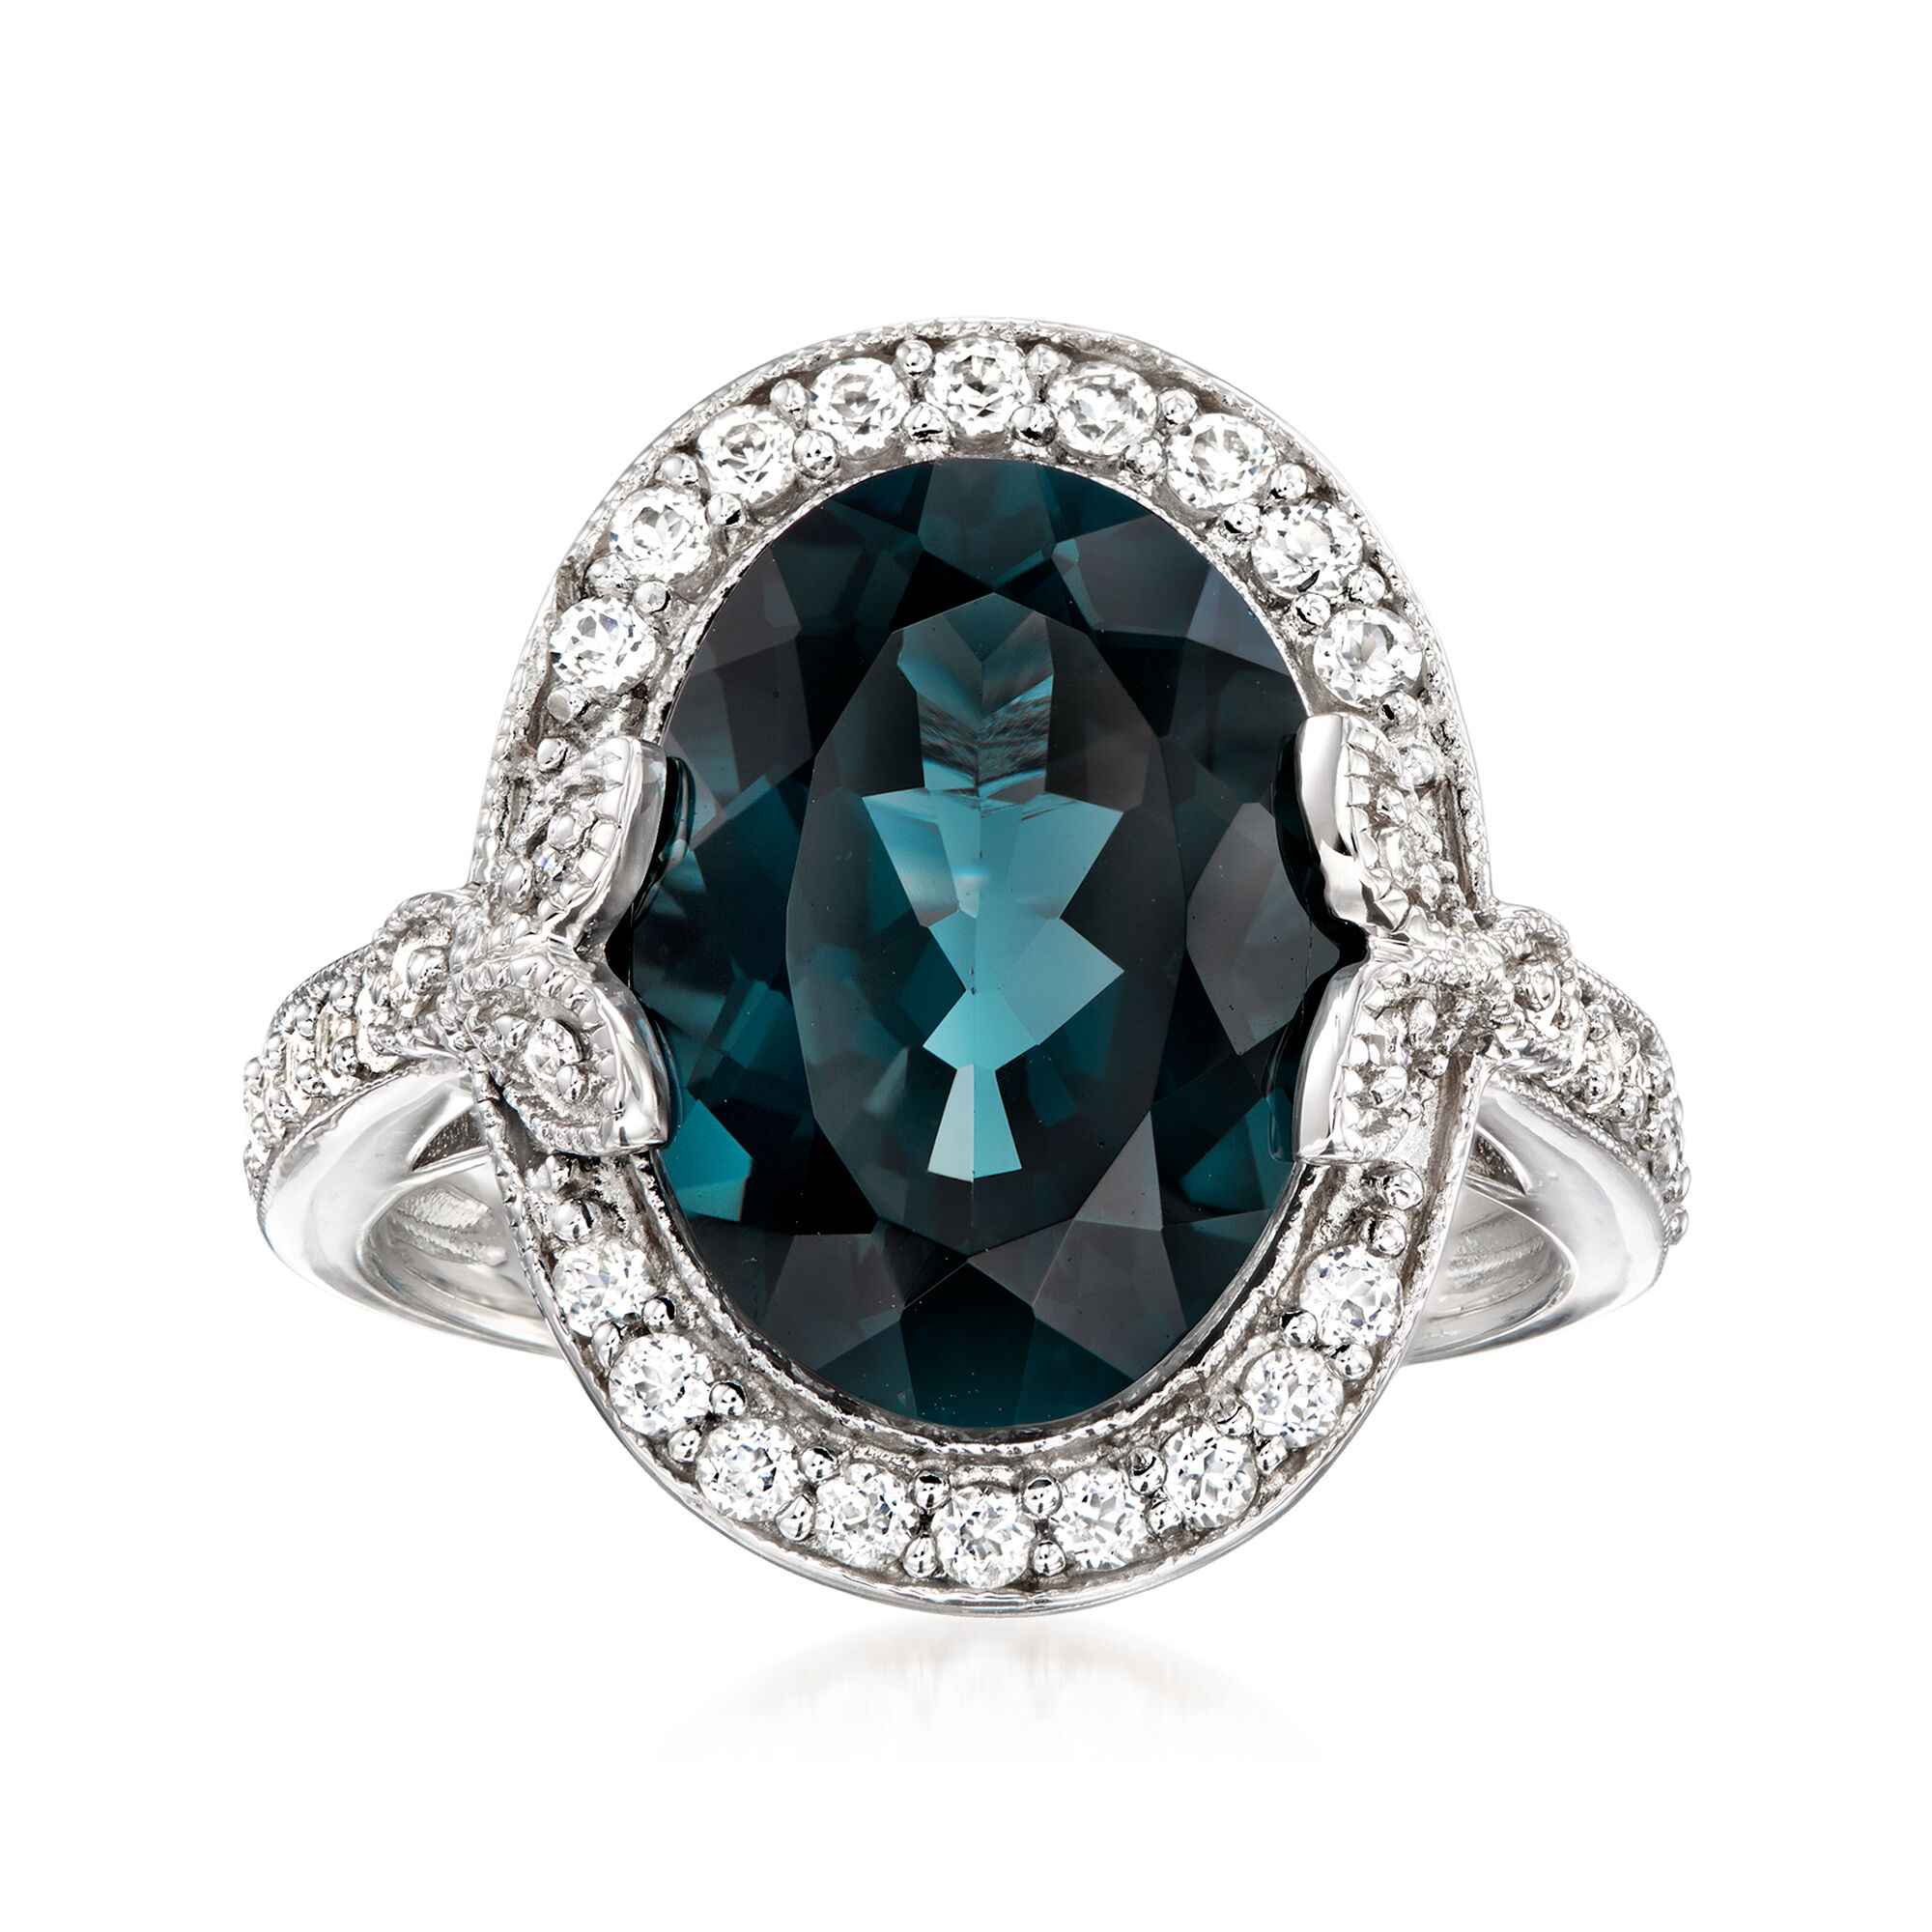 WOMENS PLATINUM OVER STERLING SILVER OVAL CUT BLUE TOPAZ DIAMOND ACCENT RING